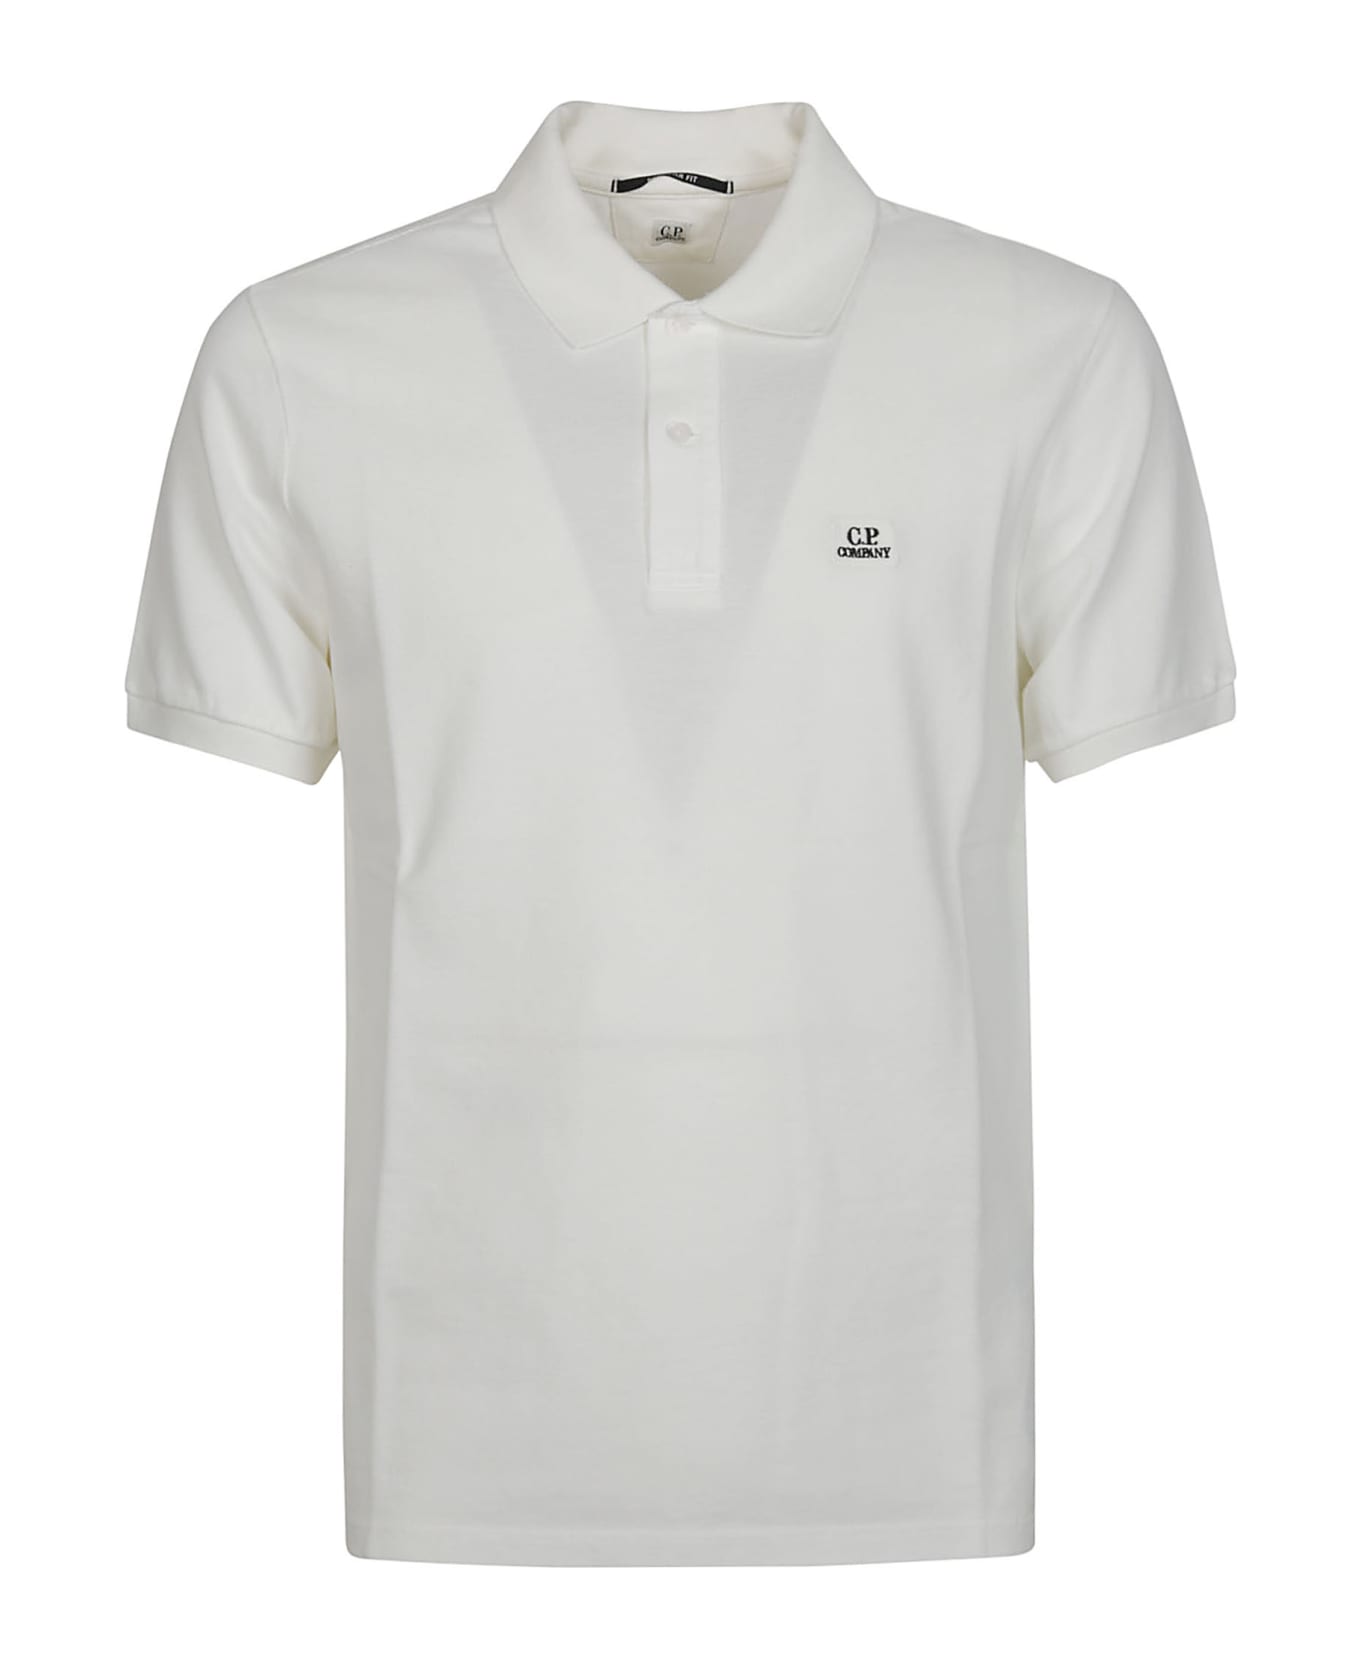 C.P. Company 24/1 Piquet Gament Dyed Short Sleeve Polo Shirt - Gauze White ポロシャツ